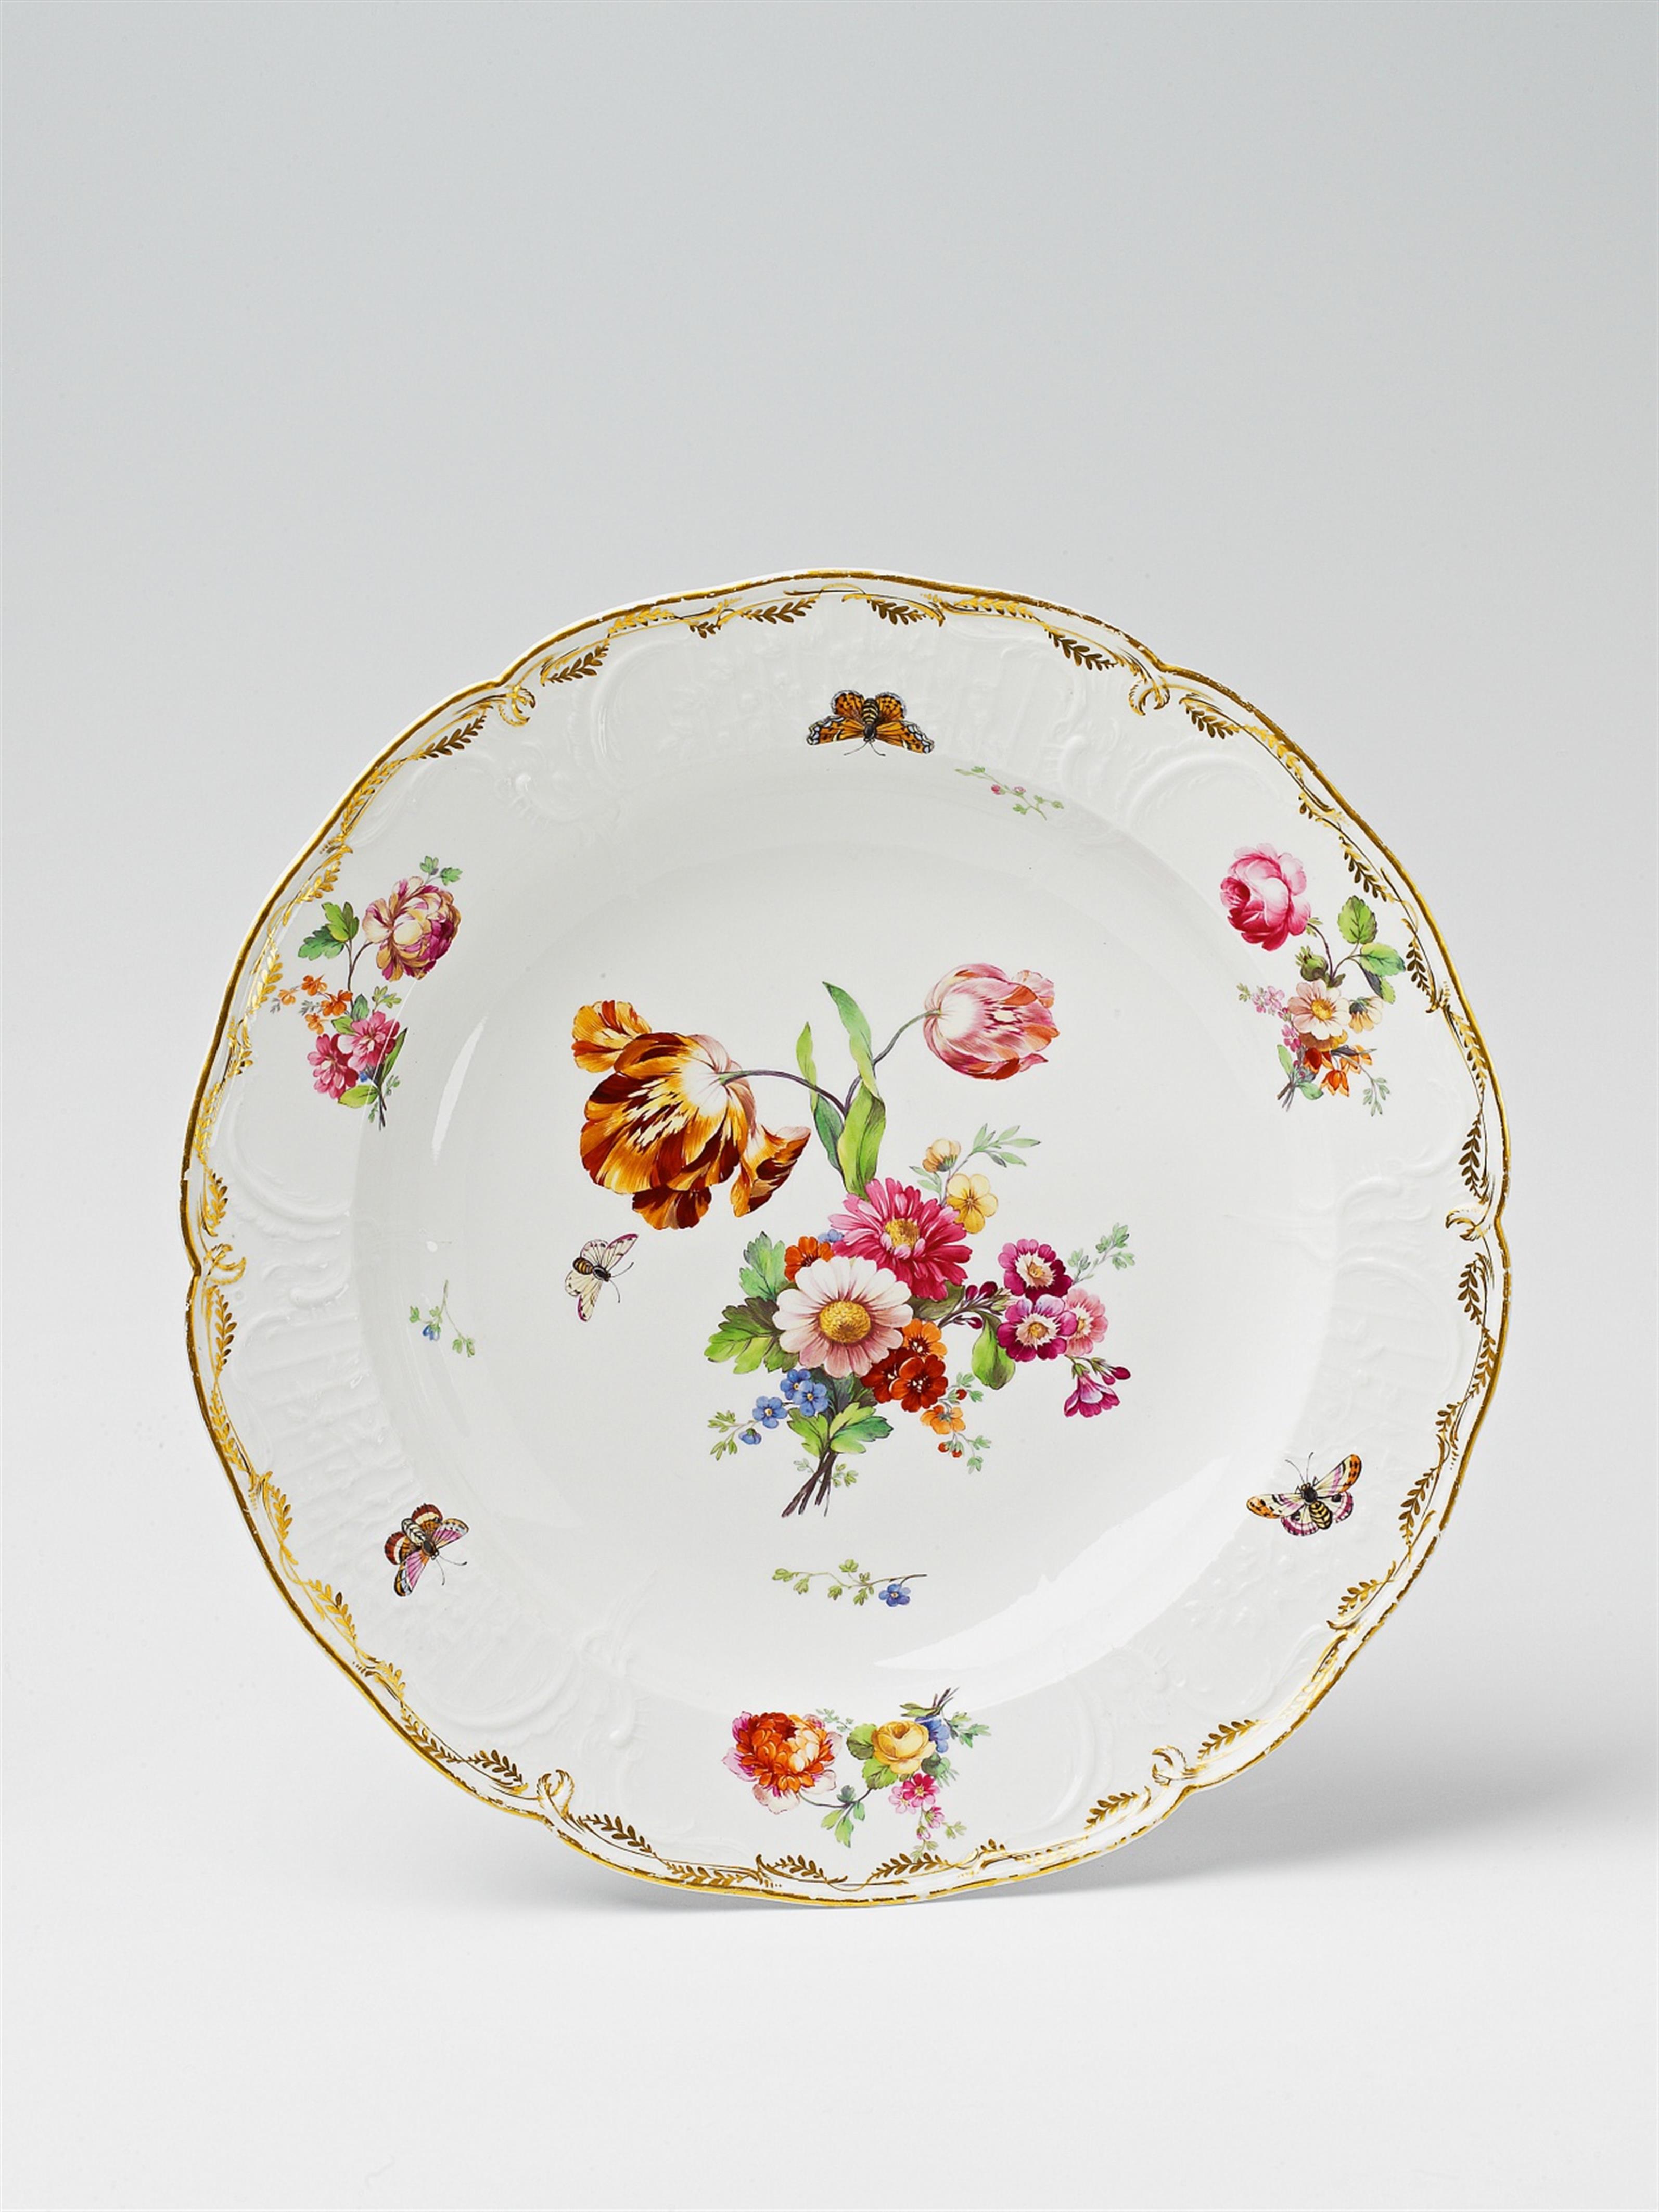 A Berlin KPM porcelain dish from a royal dinner service - image-1